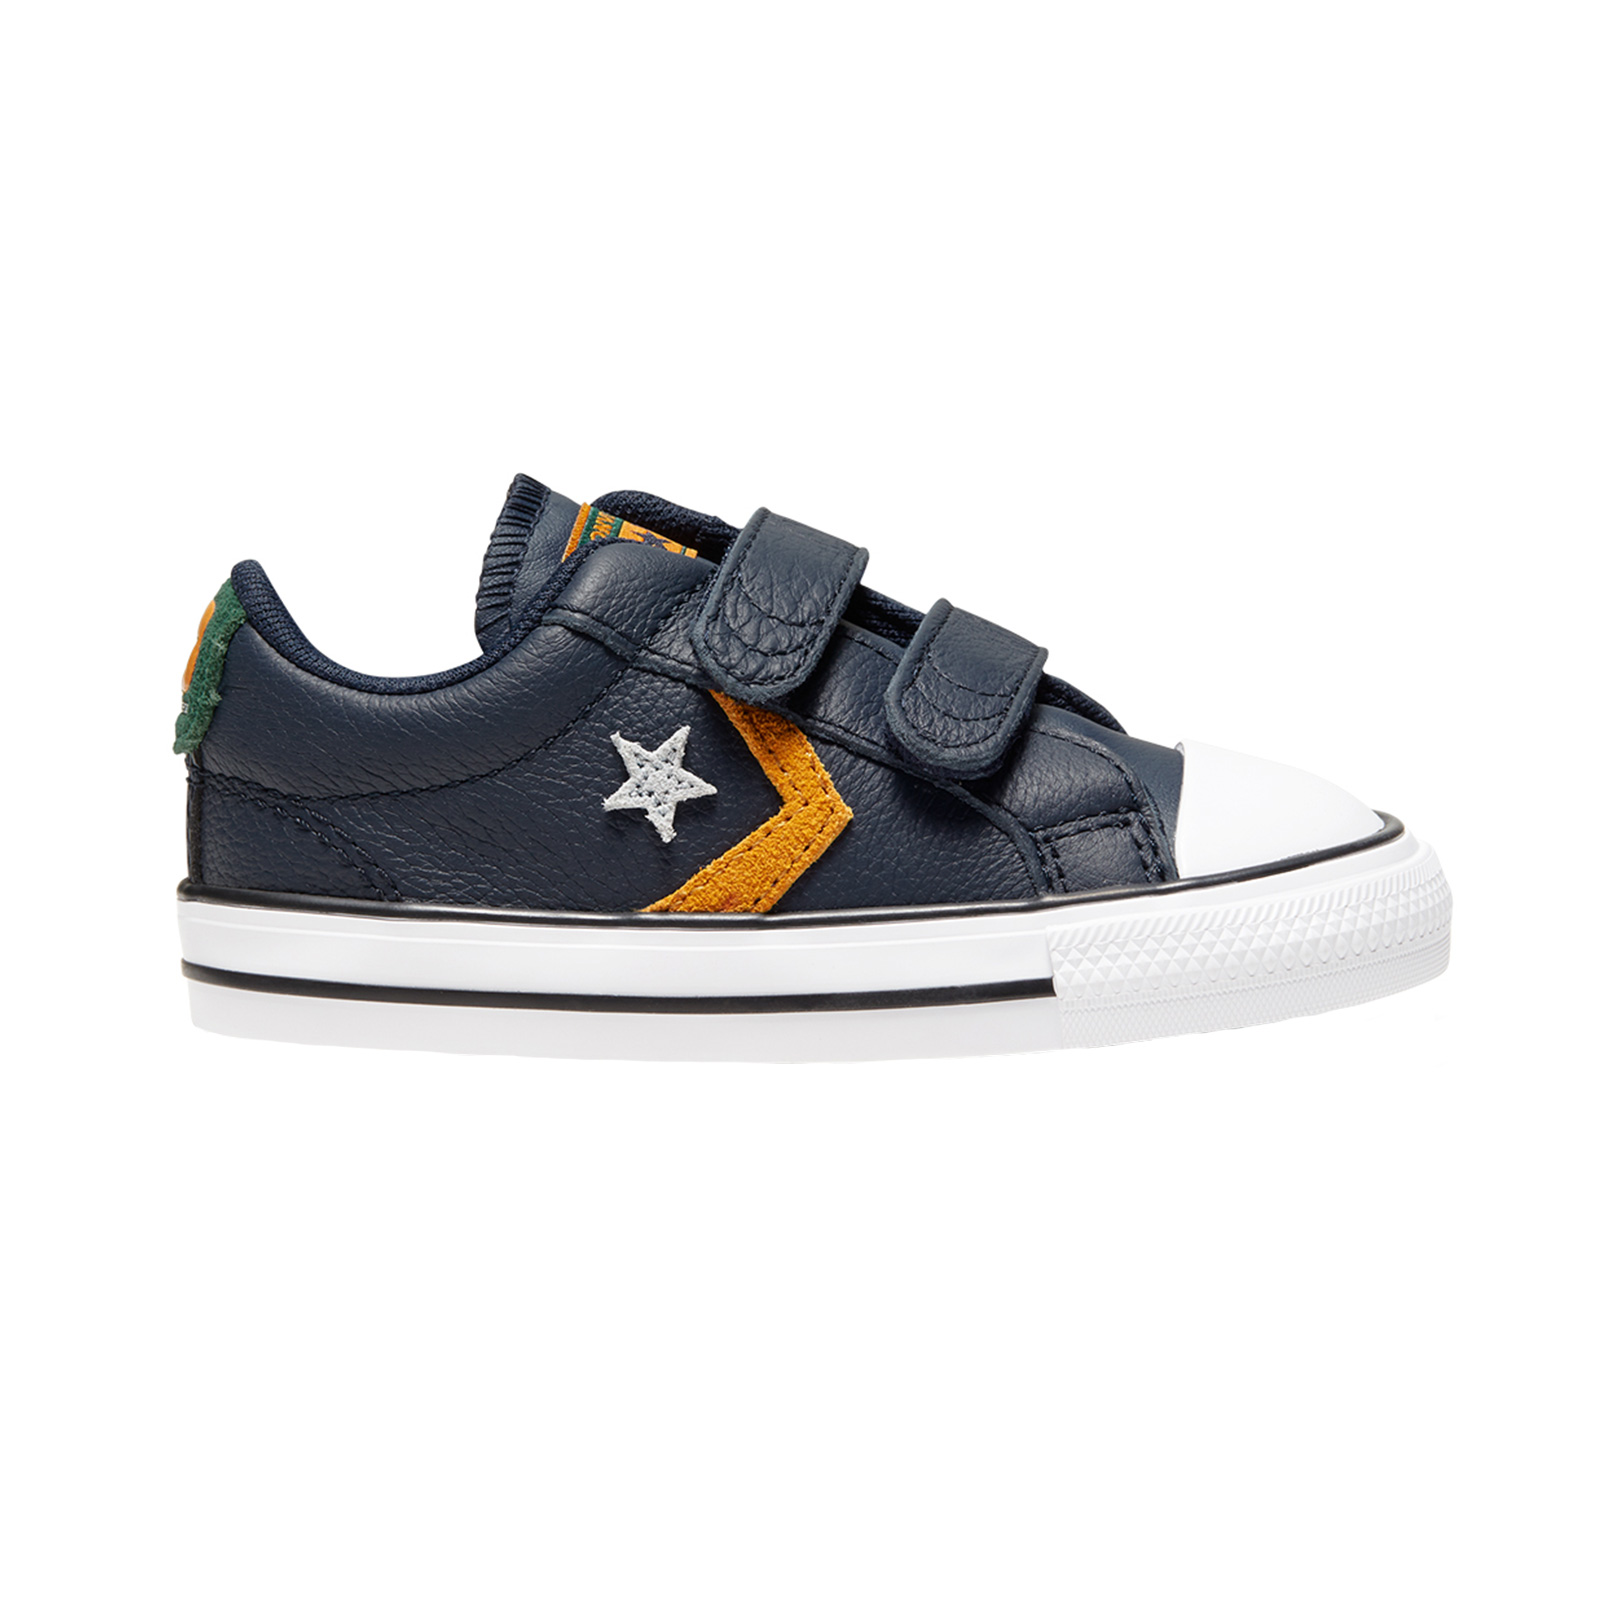 Converse - STAR PLAYER 2V - 467-OBSIDIAN/MIDNIGHT CLOVER Παιδικά > Παπούτσια > Sneaker > Παπούτσι Low Cut